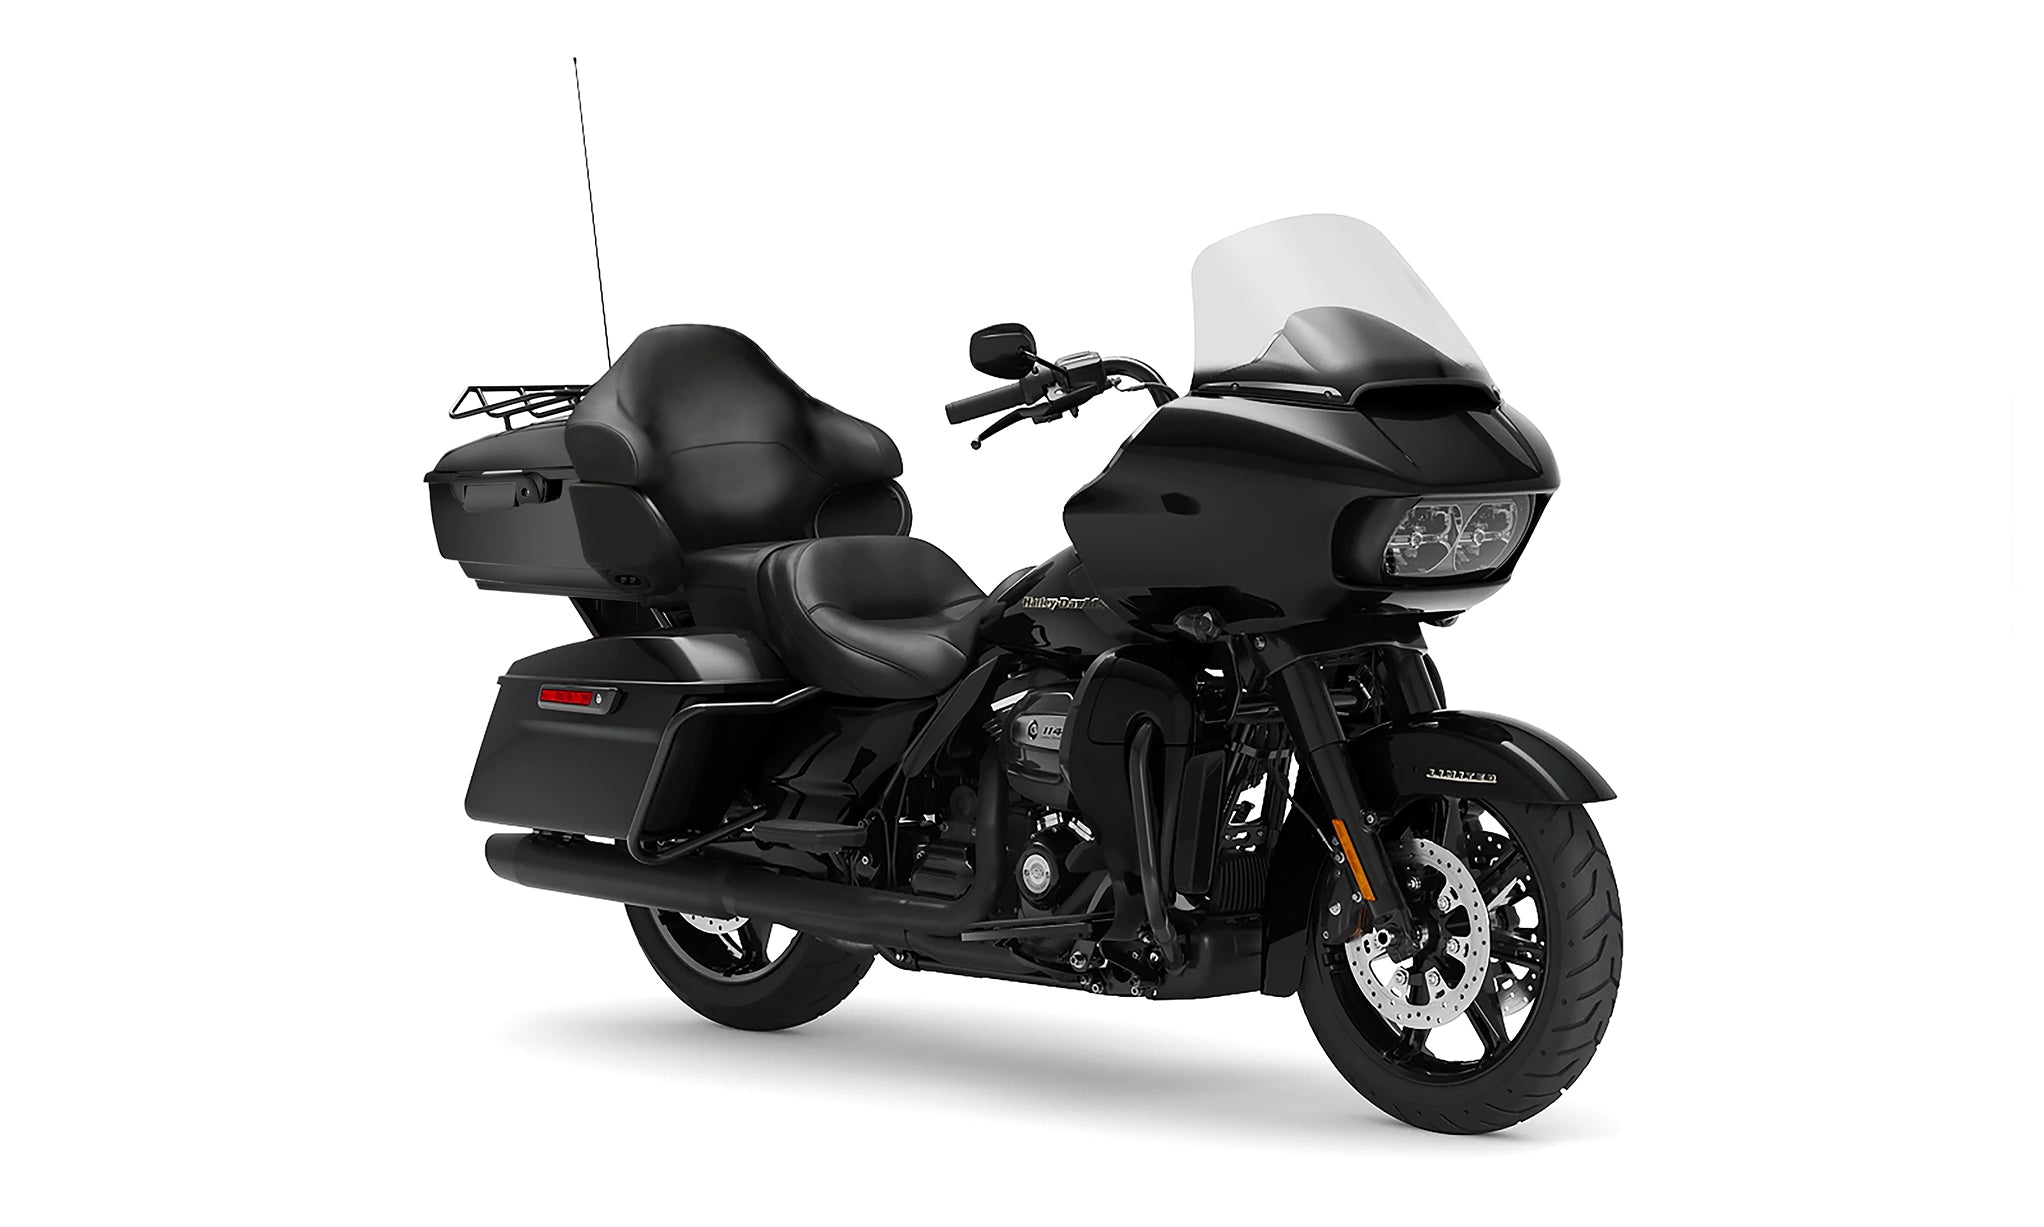 Viking Premium Tour Pack Backrest Pad For Harley Street Glide Bag on Bike View @expand